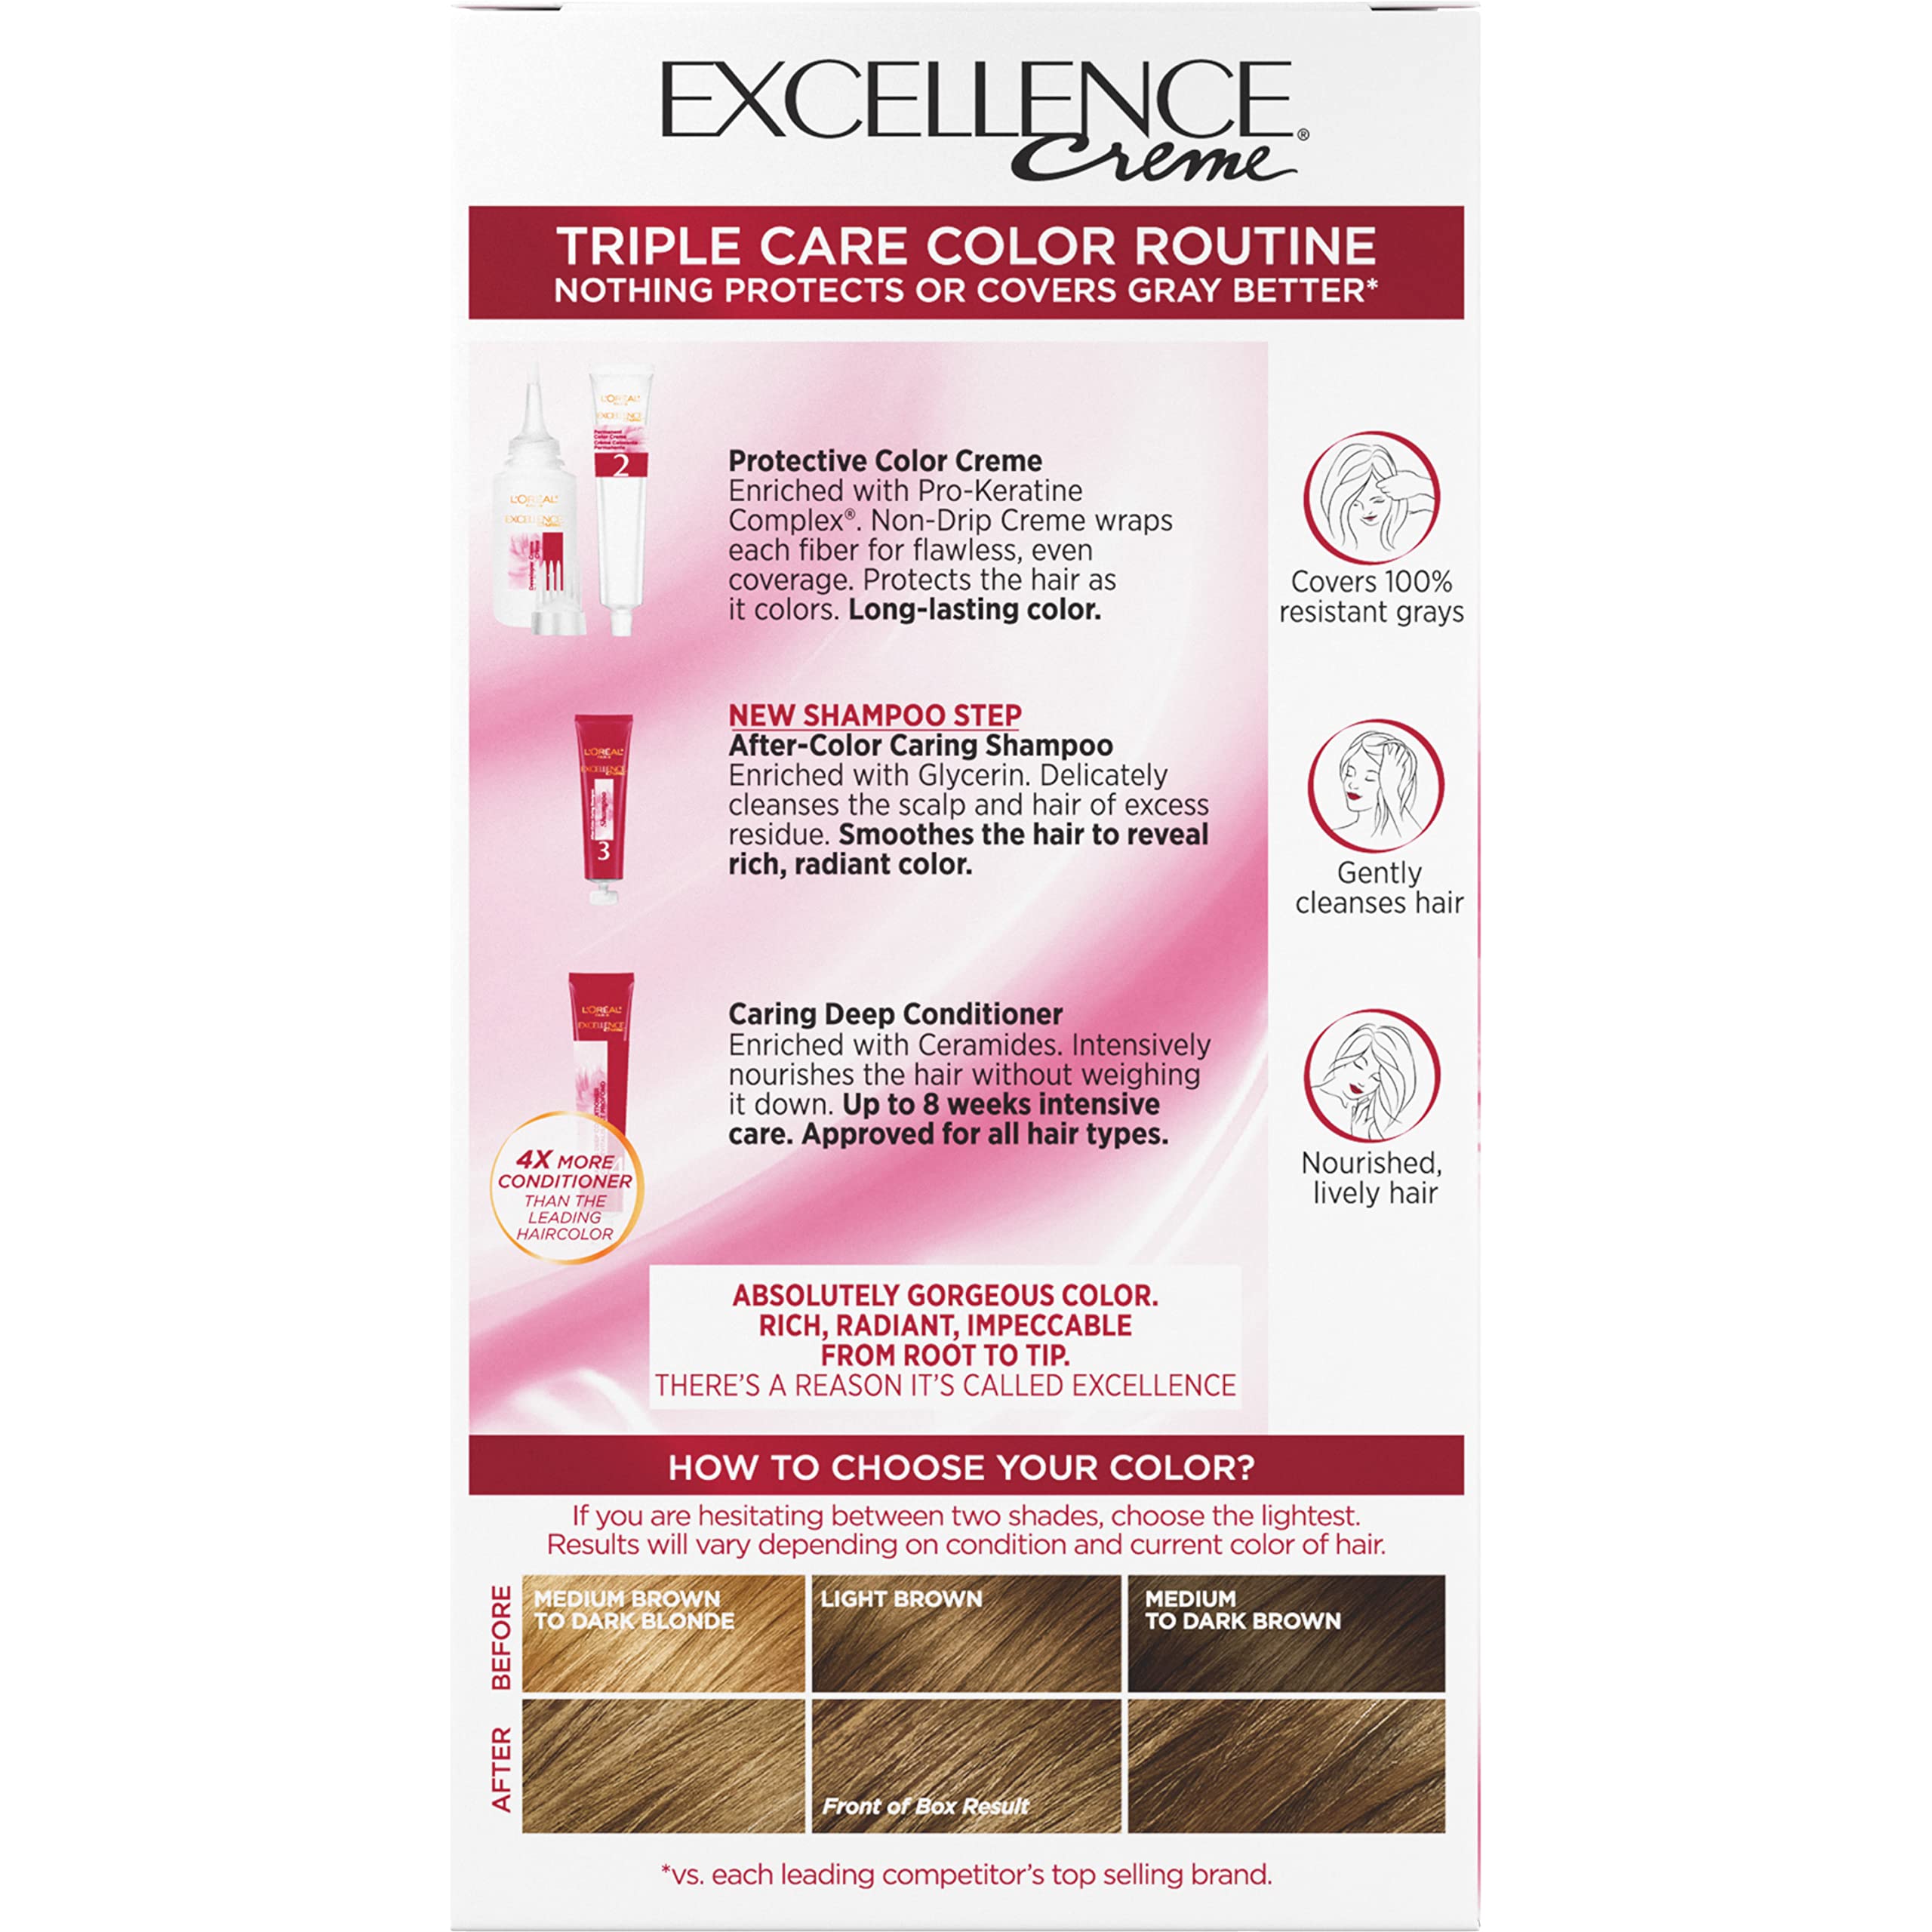 L'Oreal Paris Excellence Creme Permanent Triple Care Hair Color, 6 Light Brown Hair Dye Kit, Gray Coverage For Up to 8 Weeks, All Hair Types, Pack of 1